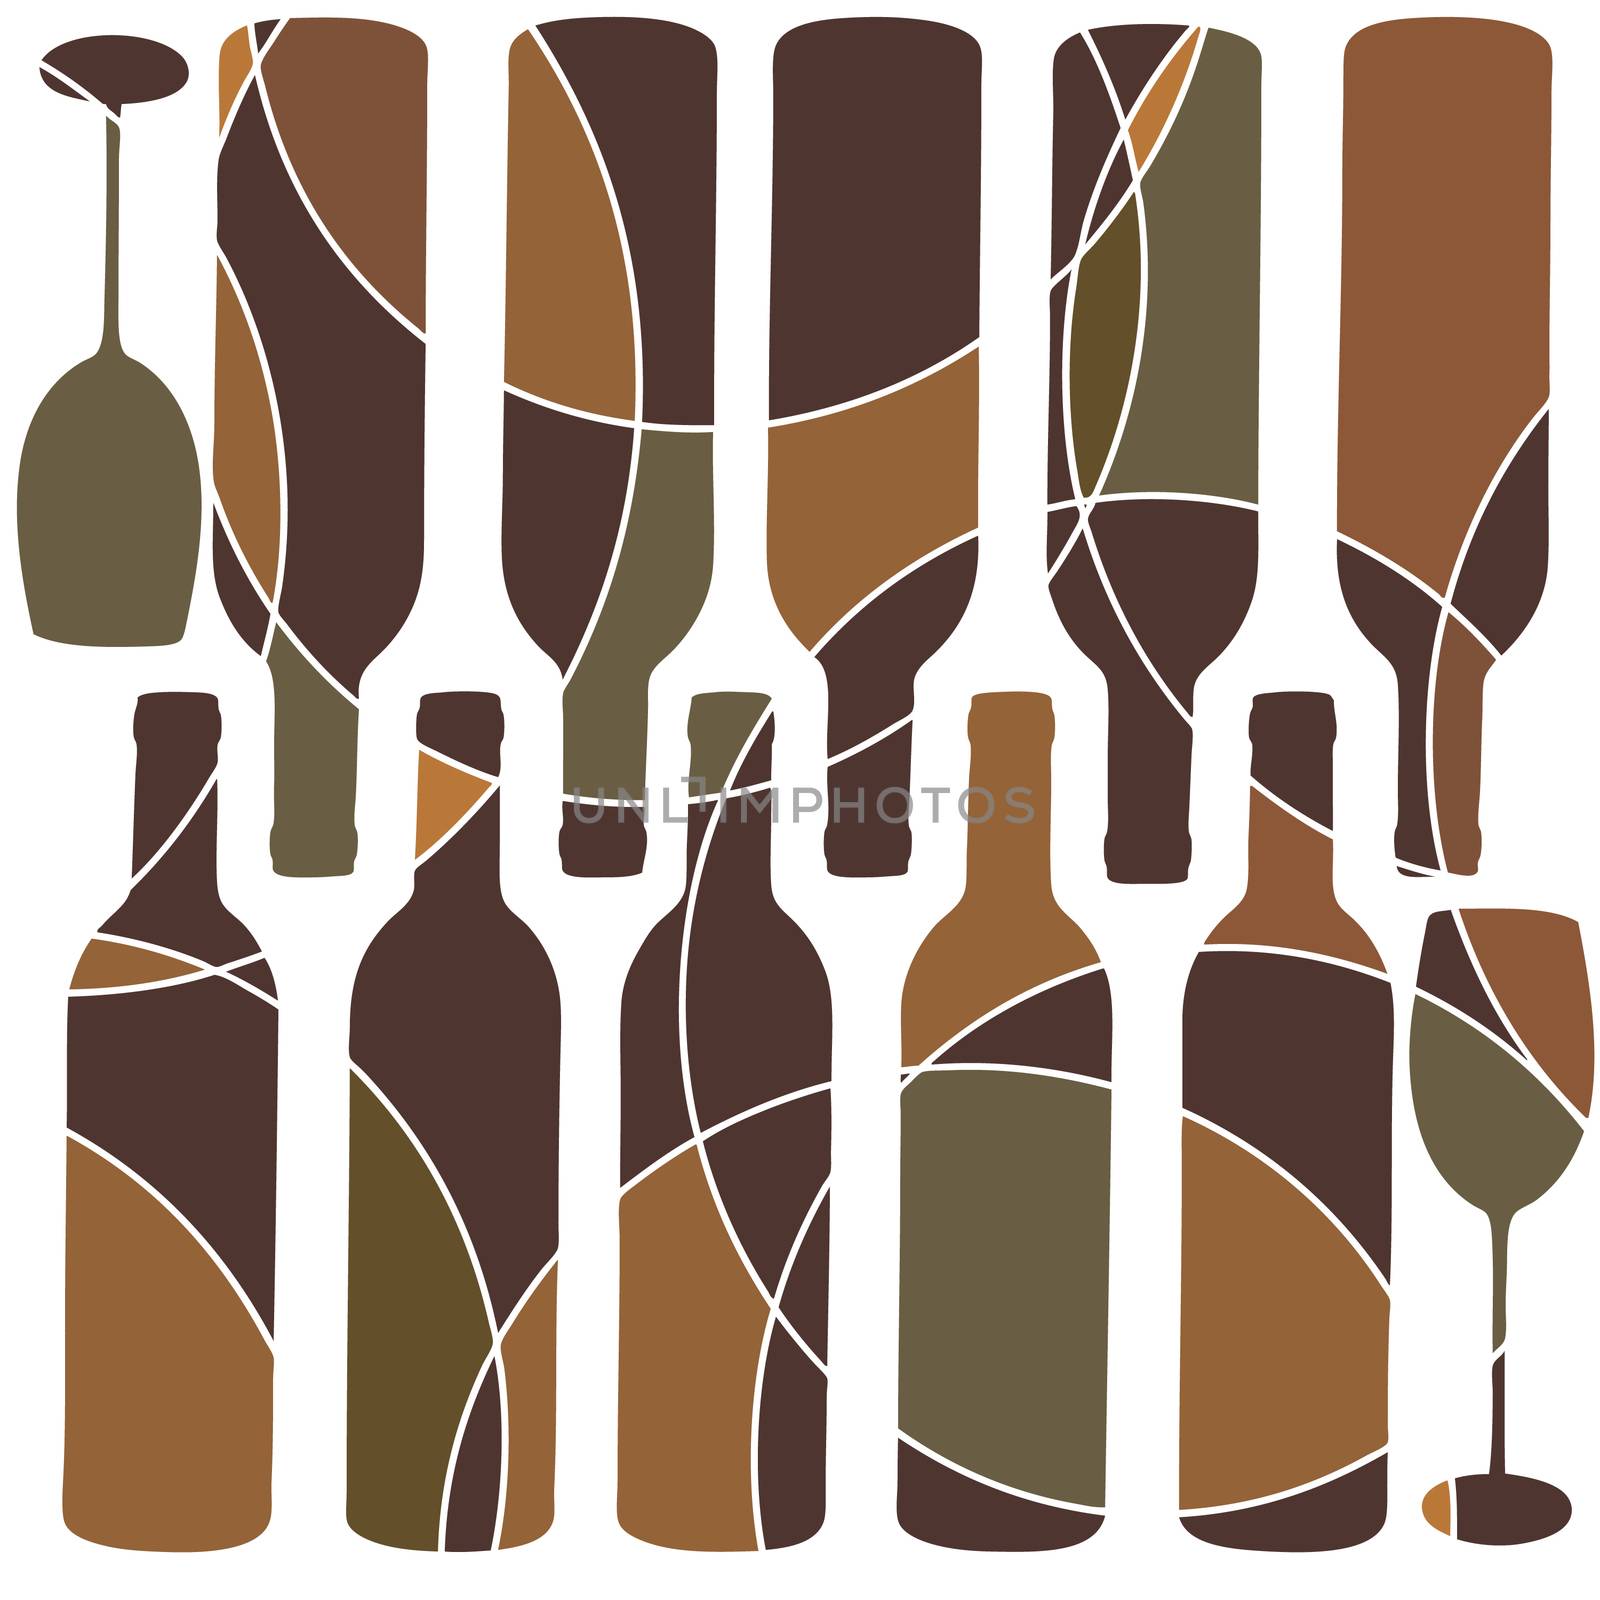 abstract brown wine bottle design by megnomad